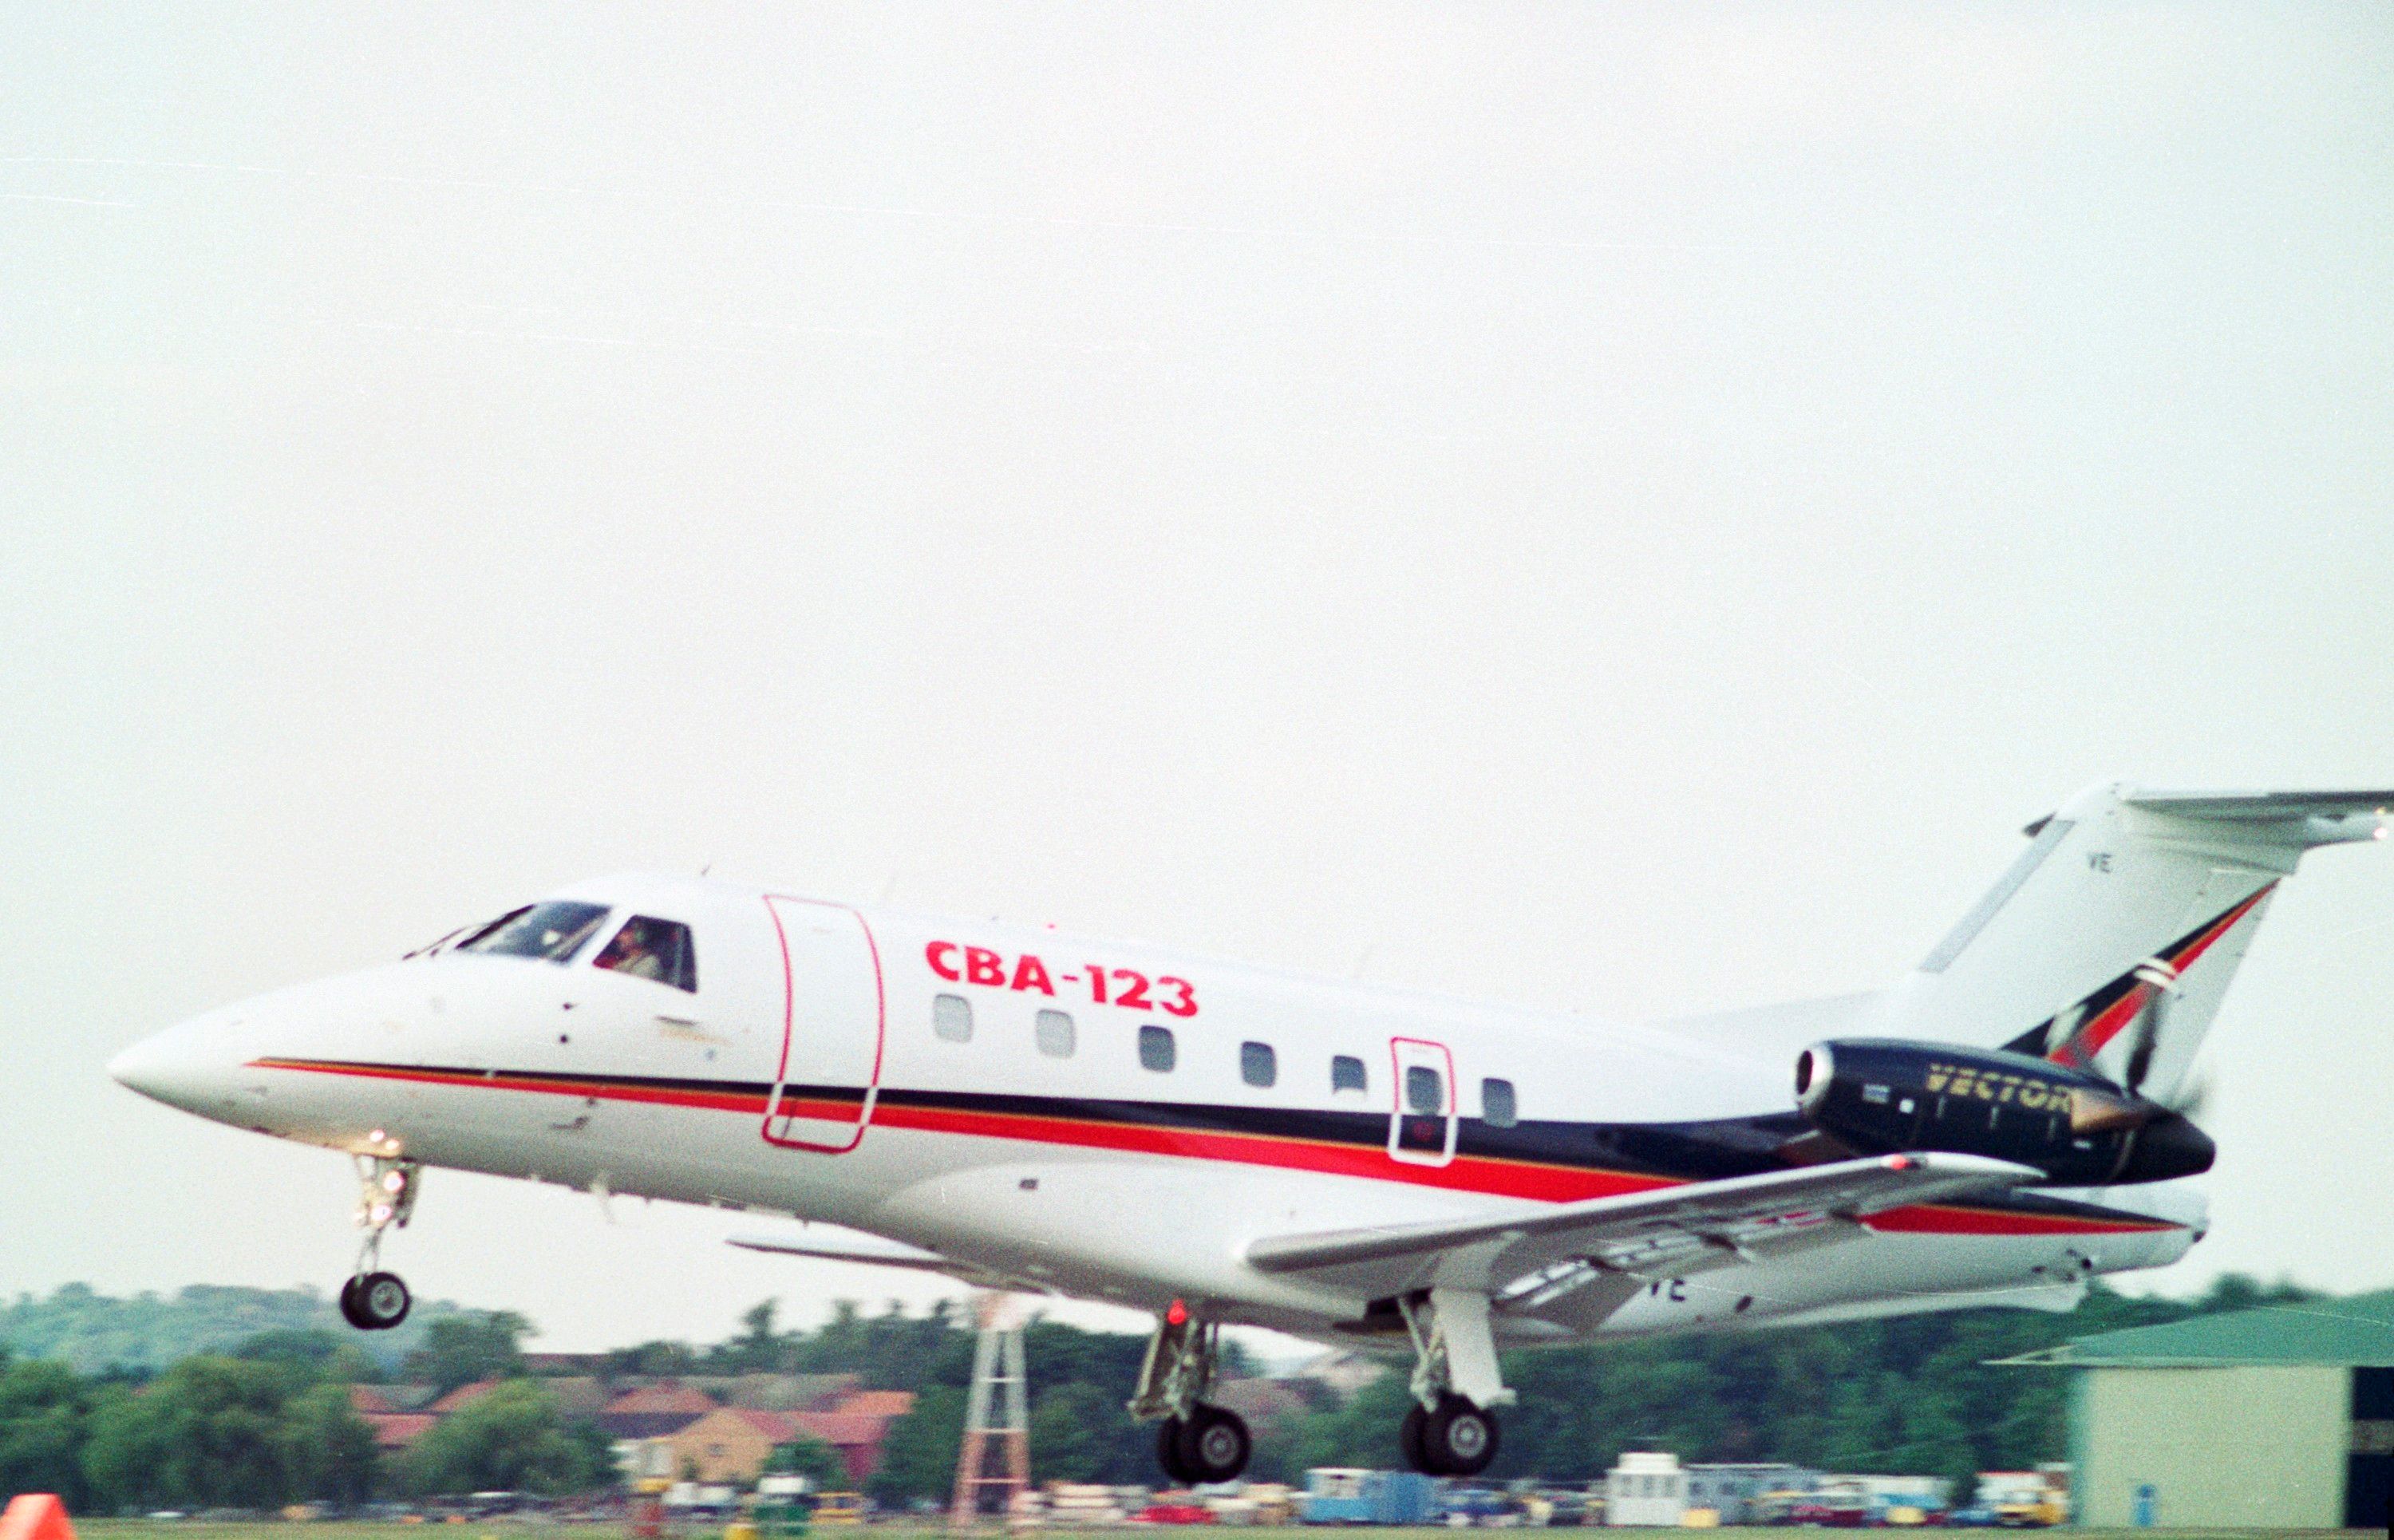 An Embraer/FMA CBA 123 Vector about to land.